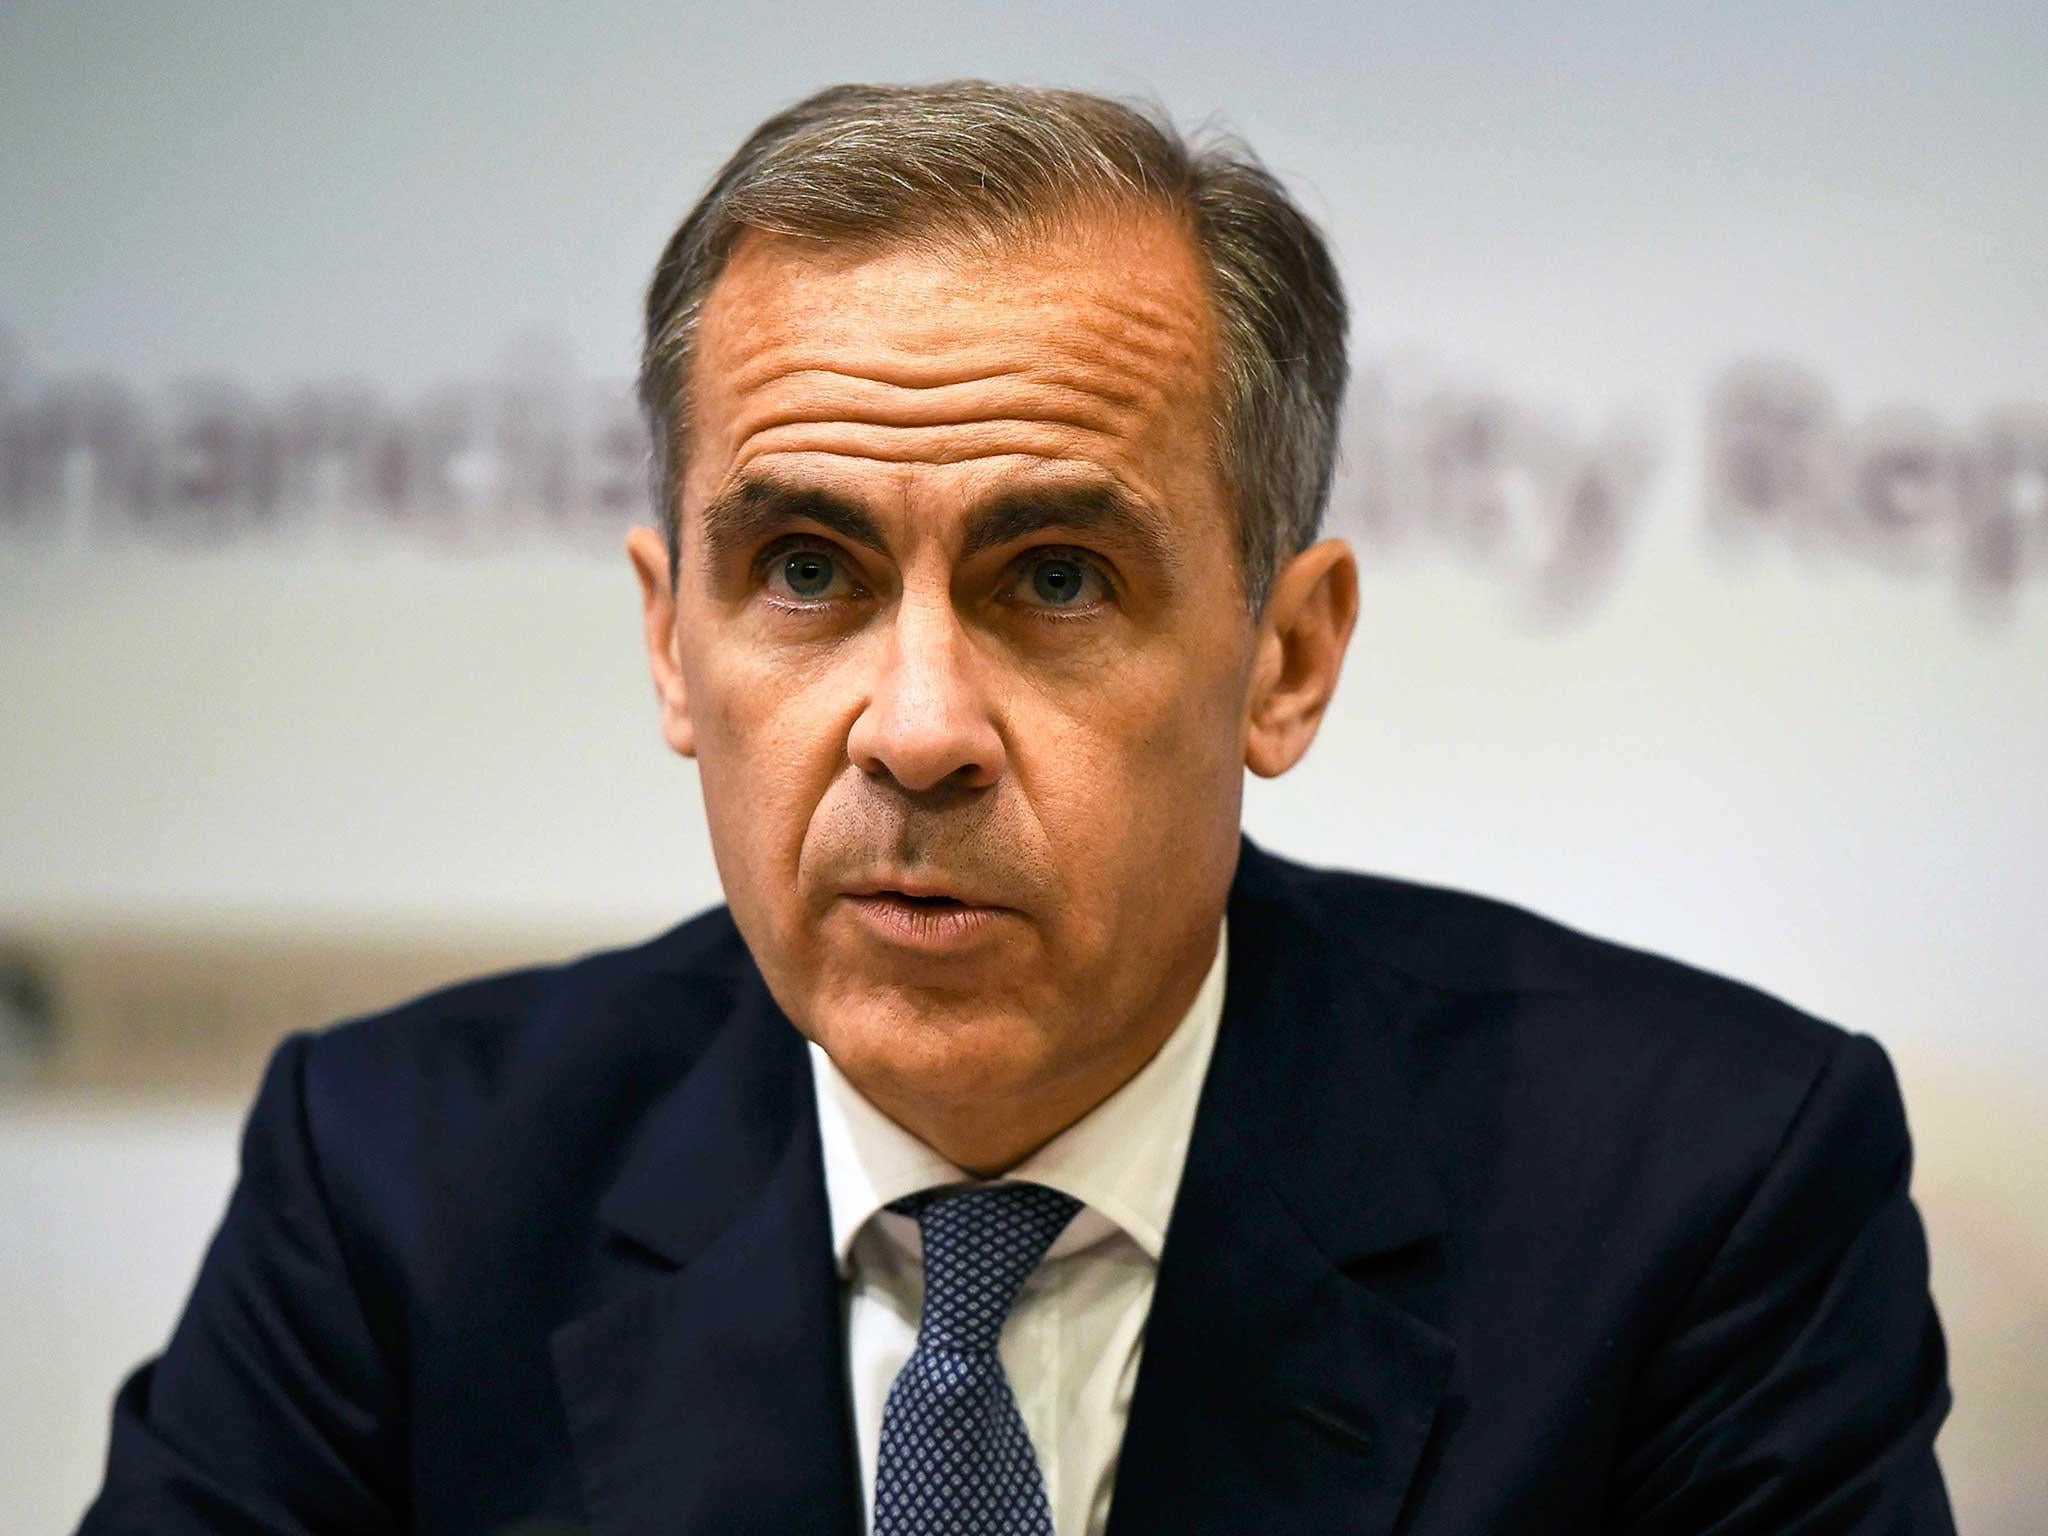 Governor Carney says the stimulus will boost output - but how?